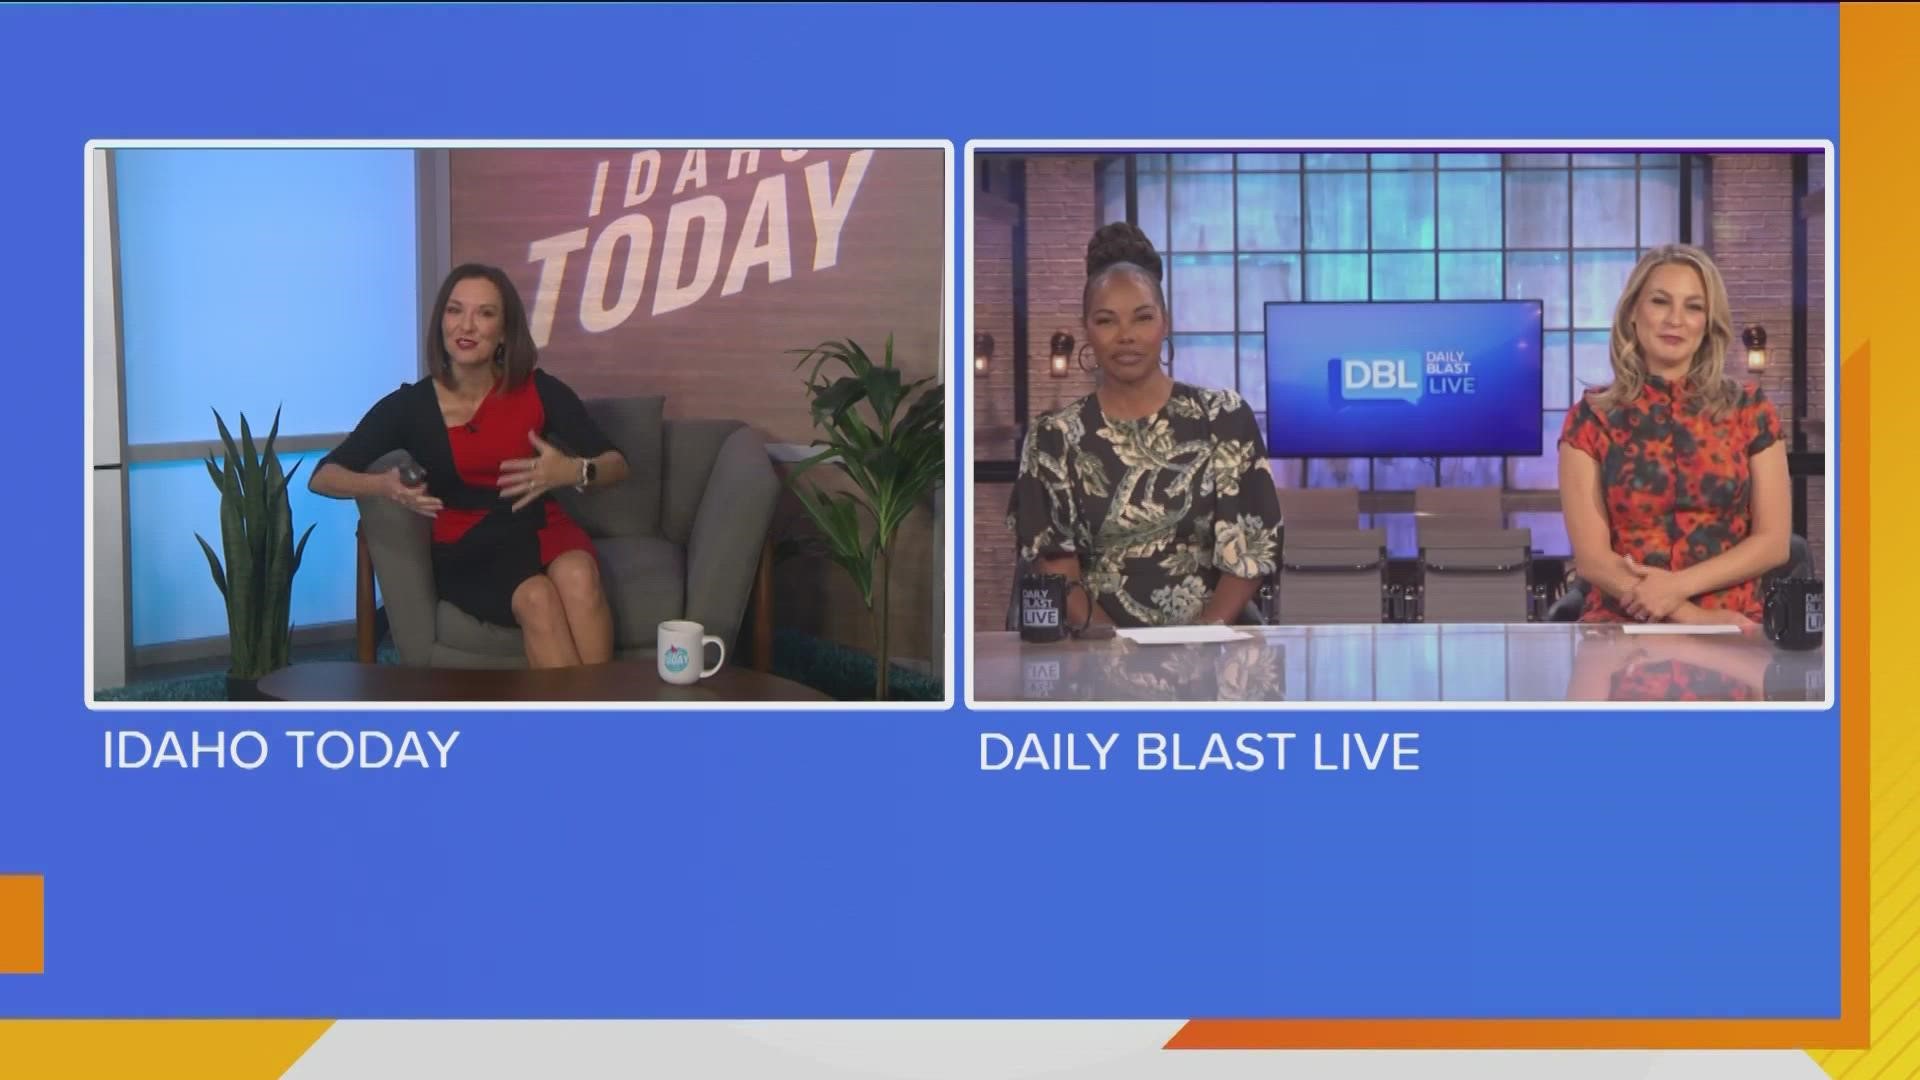 Mellisa catches up with Erica and Tori from Daily Blast Live to discuss their upcoming 6th season & what to expect this week. Watch daily at 2pm on KTVB.